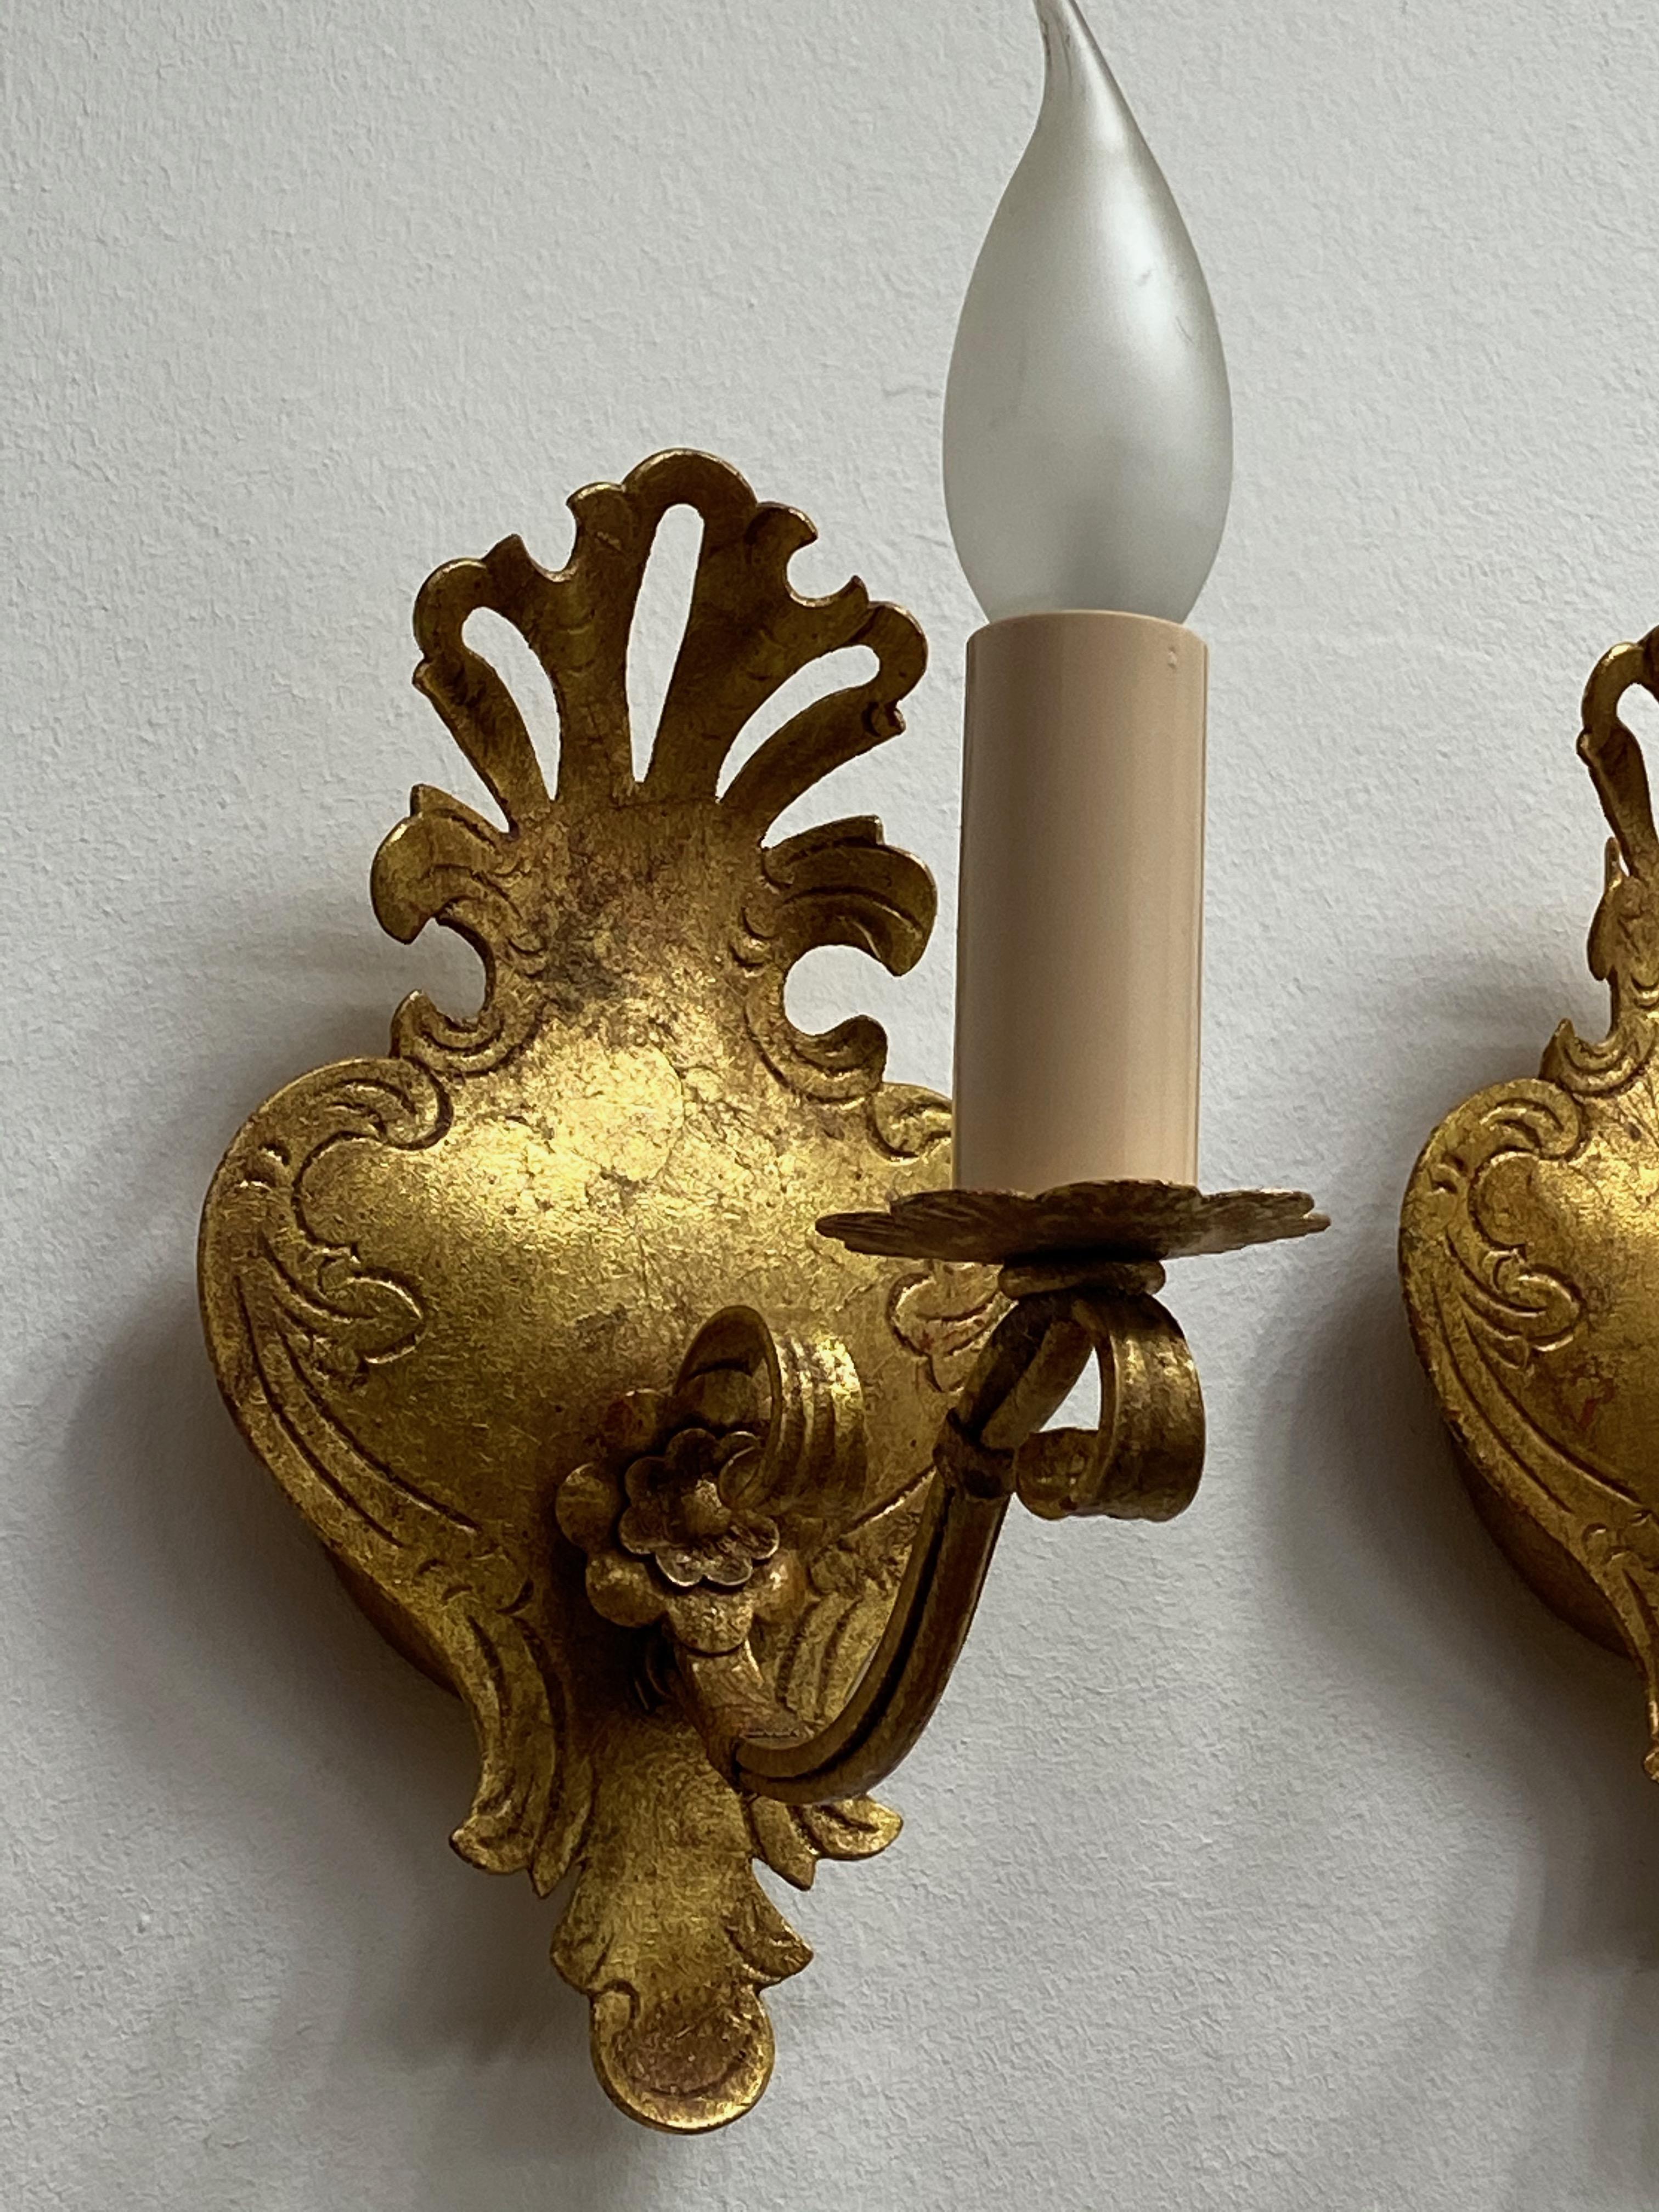 Mid-20th Century Pair of Tole Toleware Sconces Gilded Metal, Reindl Leuchten, 1960s, Germany For Sale